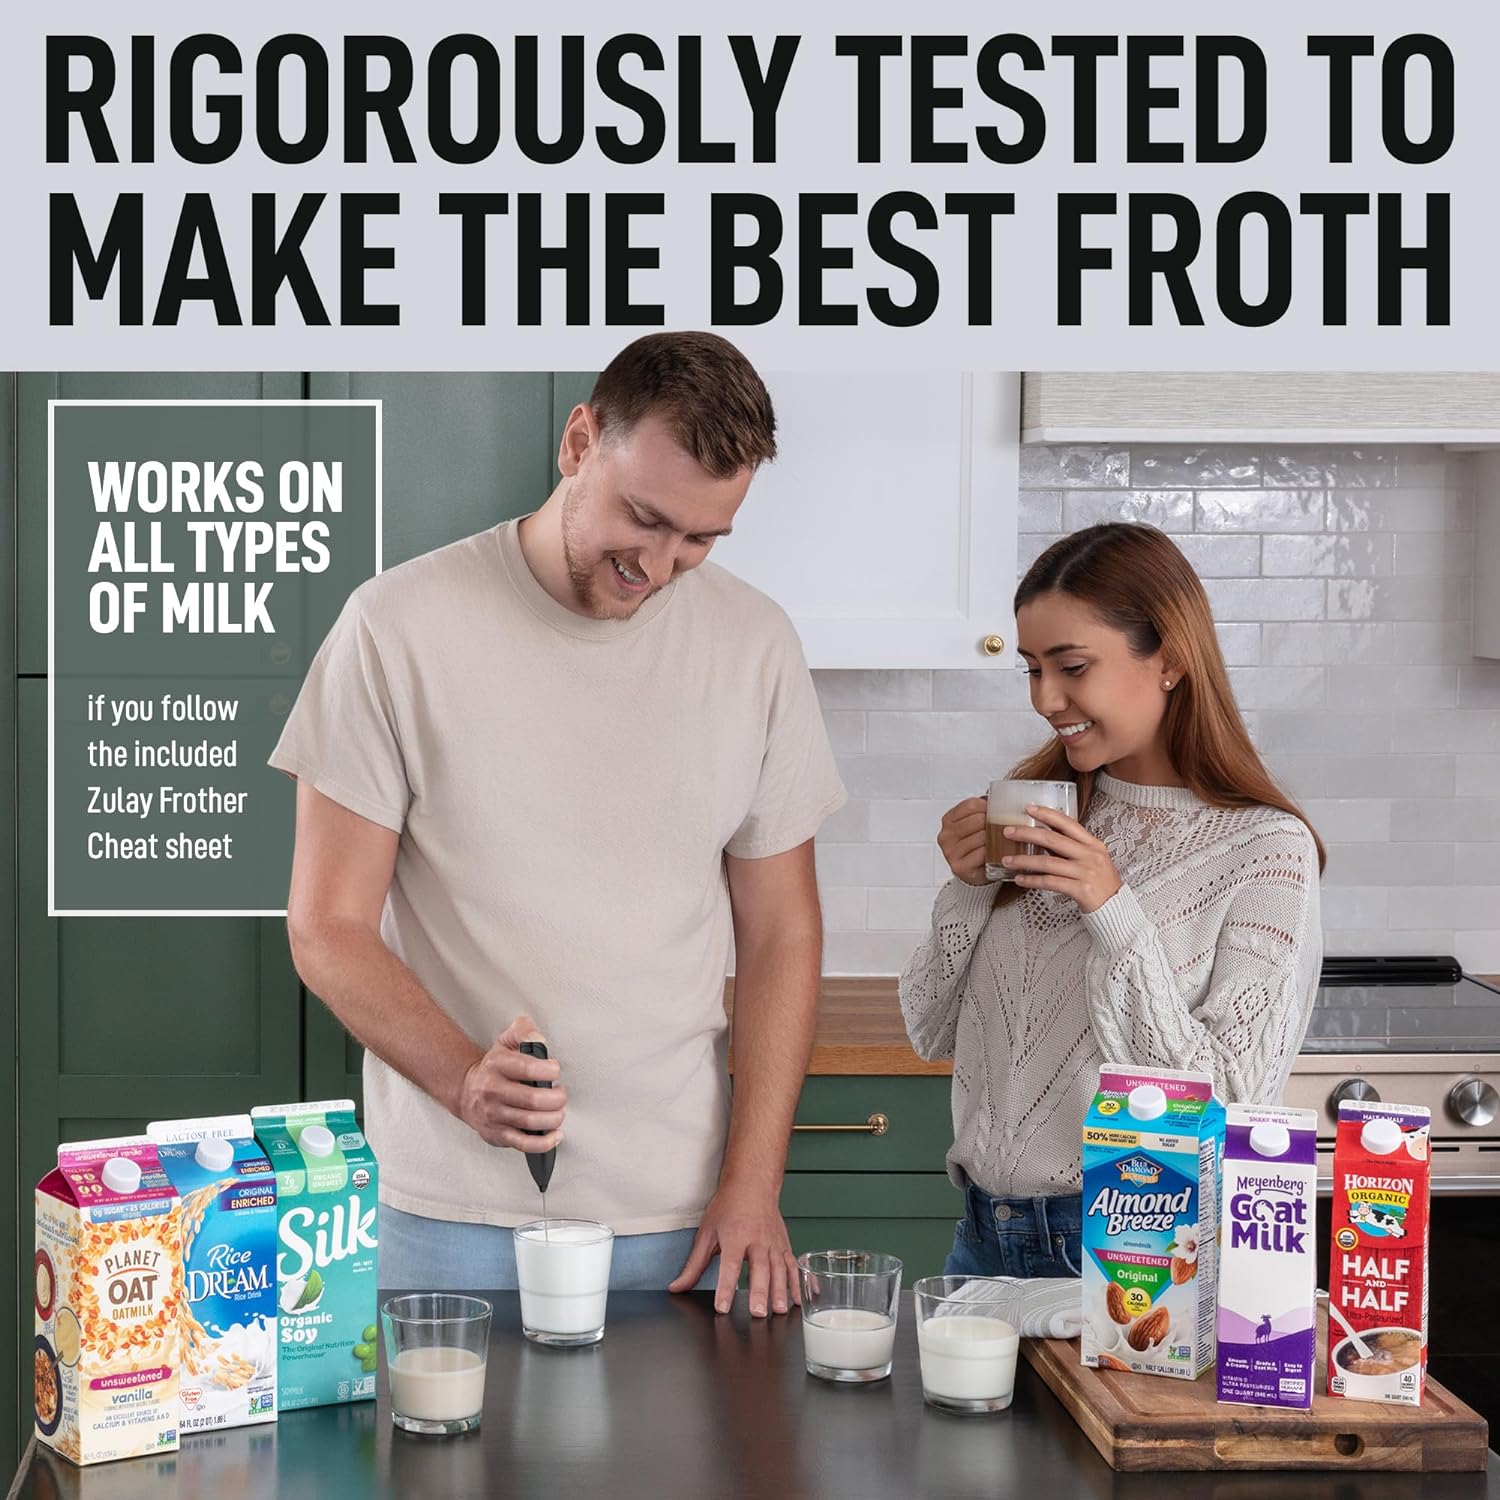 Rigorously tested milk frother